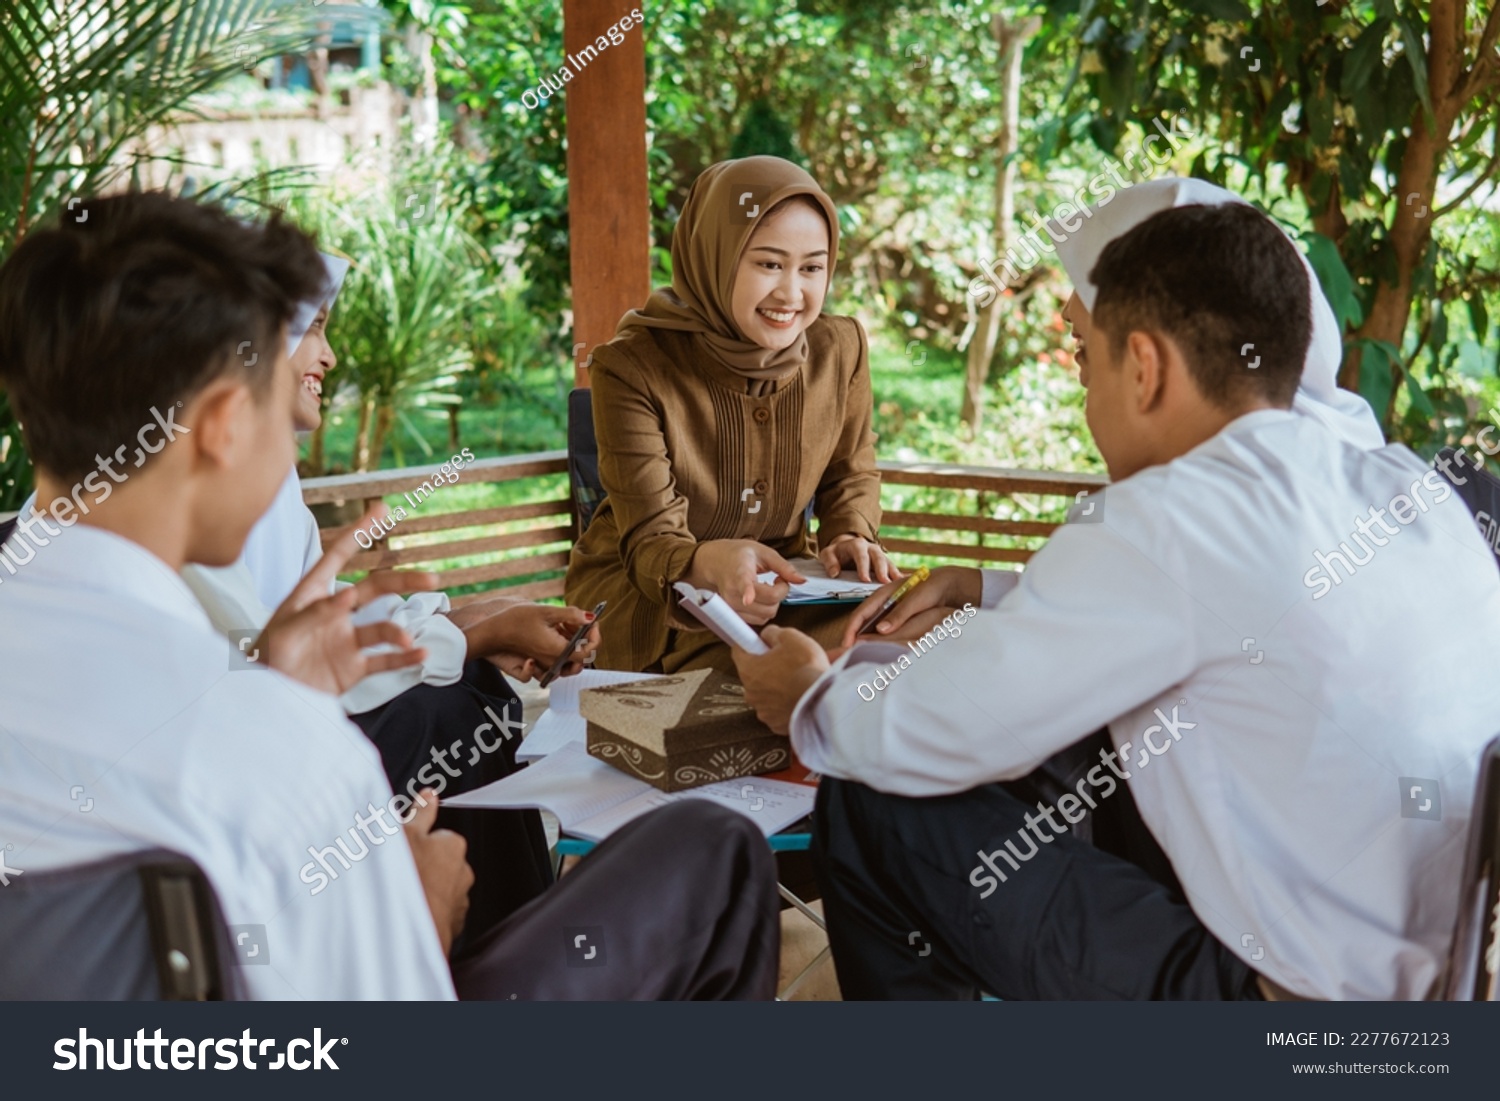 teacher in Veil guides students to do the questions in the book in the gazebo during outdoor class #2277672123